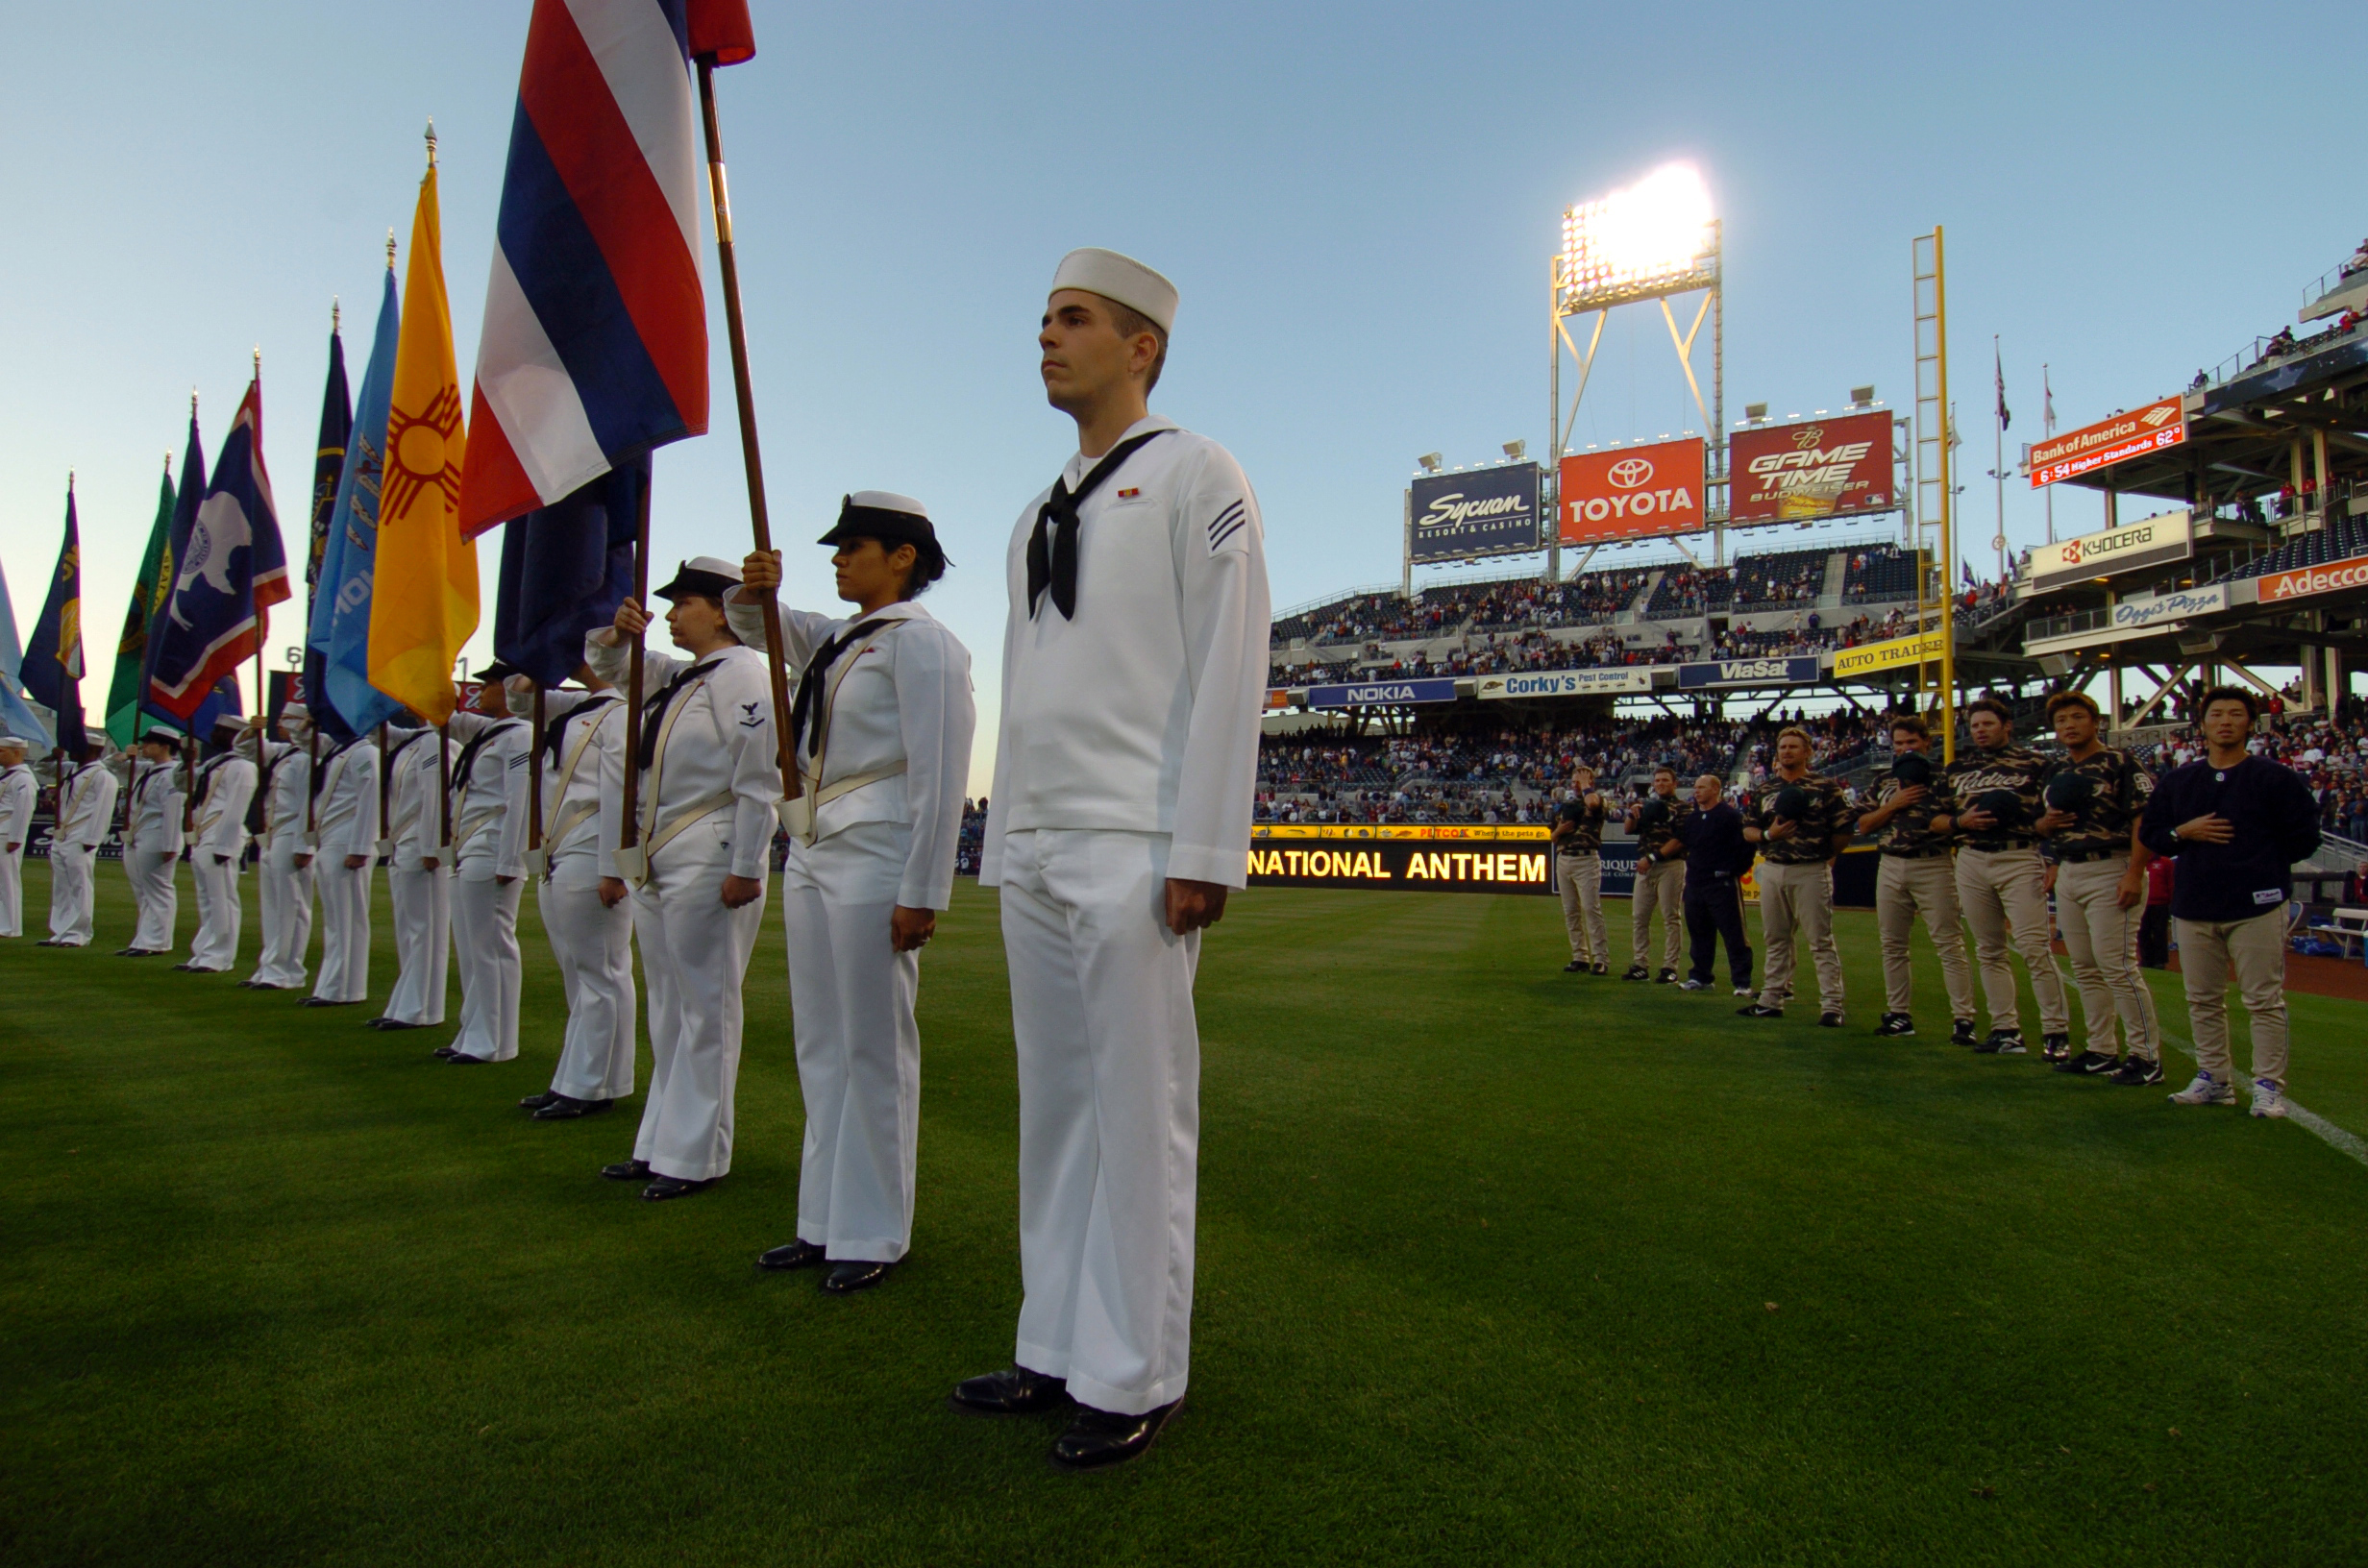 Ready for another @usaa #SDMilitary Sunday at @petcopark! 🇺🇸